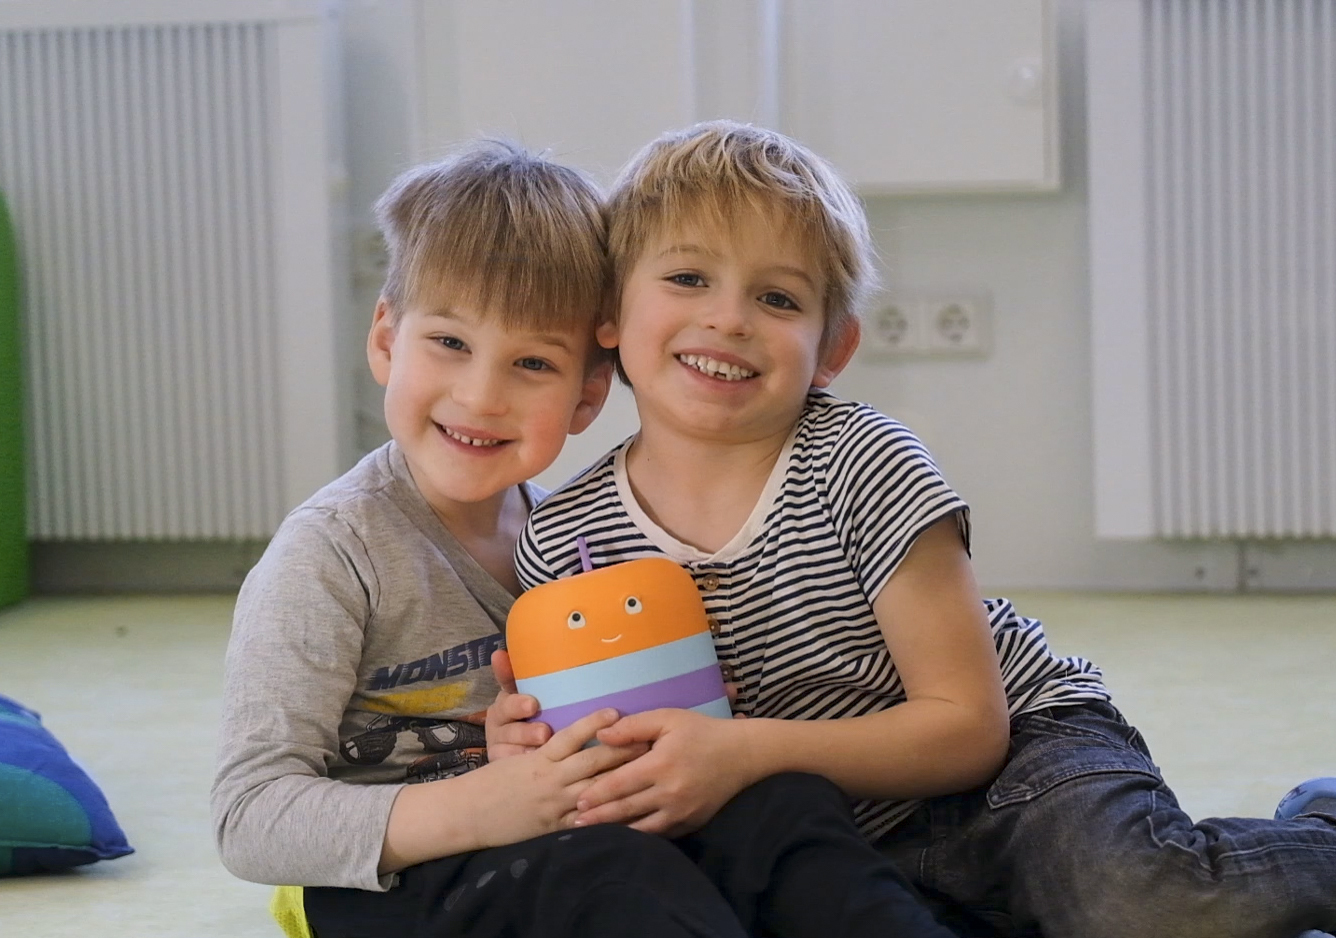 The Ohrlaf motivates children to play and communicate with each other.  (Source: Ohrlaf GmbH)